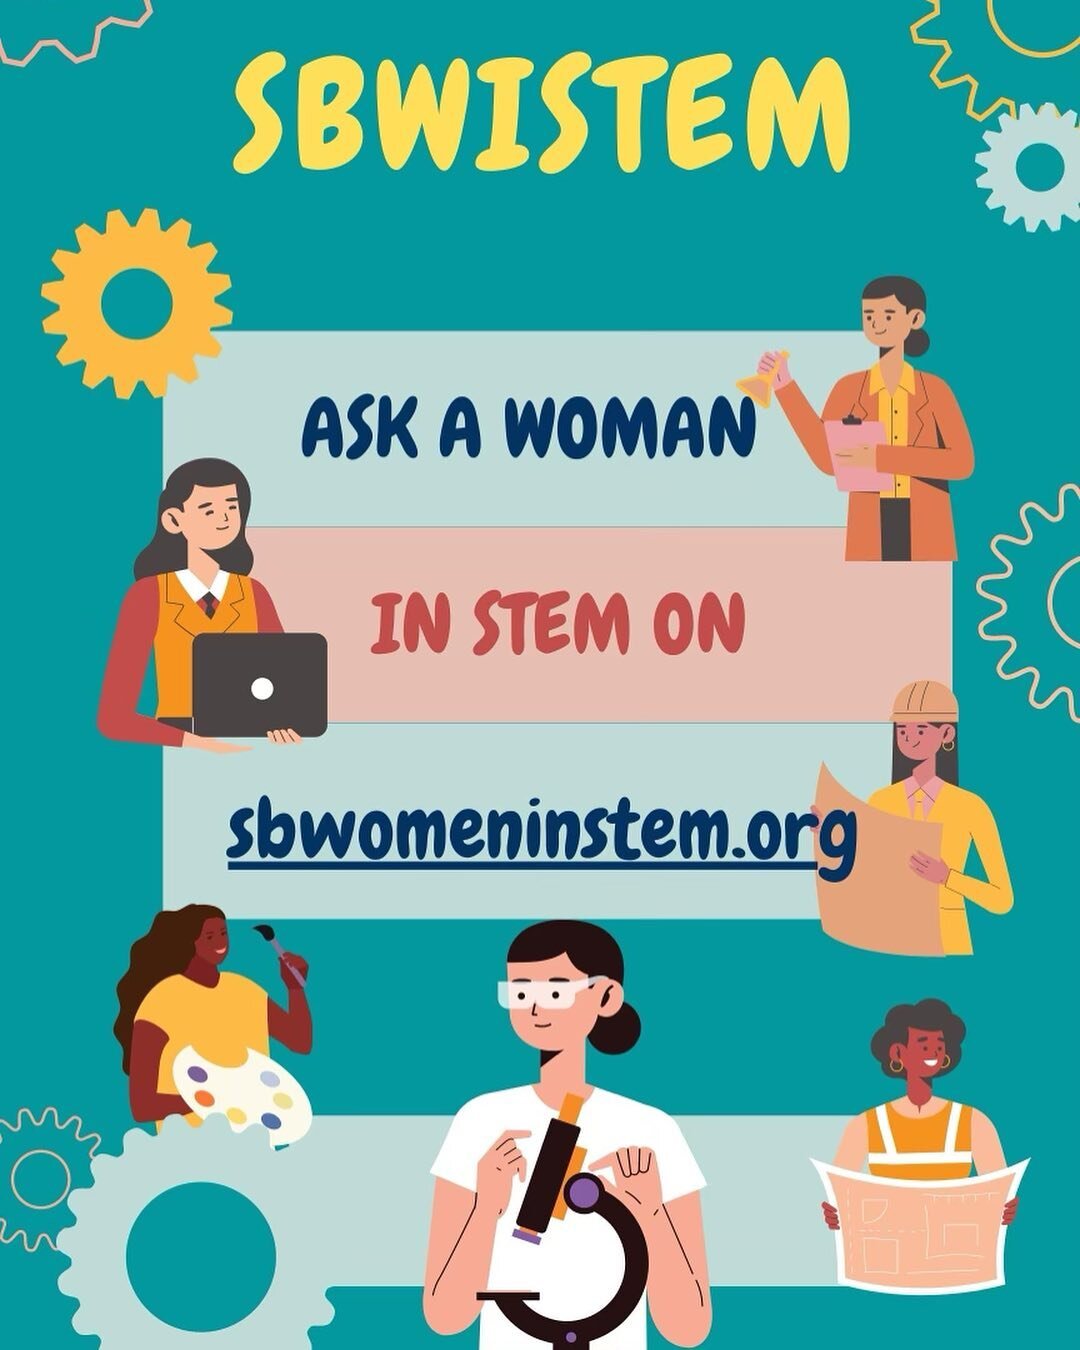 New cool thing for y&rsquo;all! 🙋&zwj;♀️
Any questions about getting into STEM + careers? Looking for professional development advice? Want to build a STEM network? Need a mentor? Santa Barbara Women in STEM is here to help. Submit your questions vi